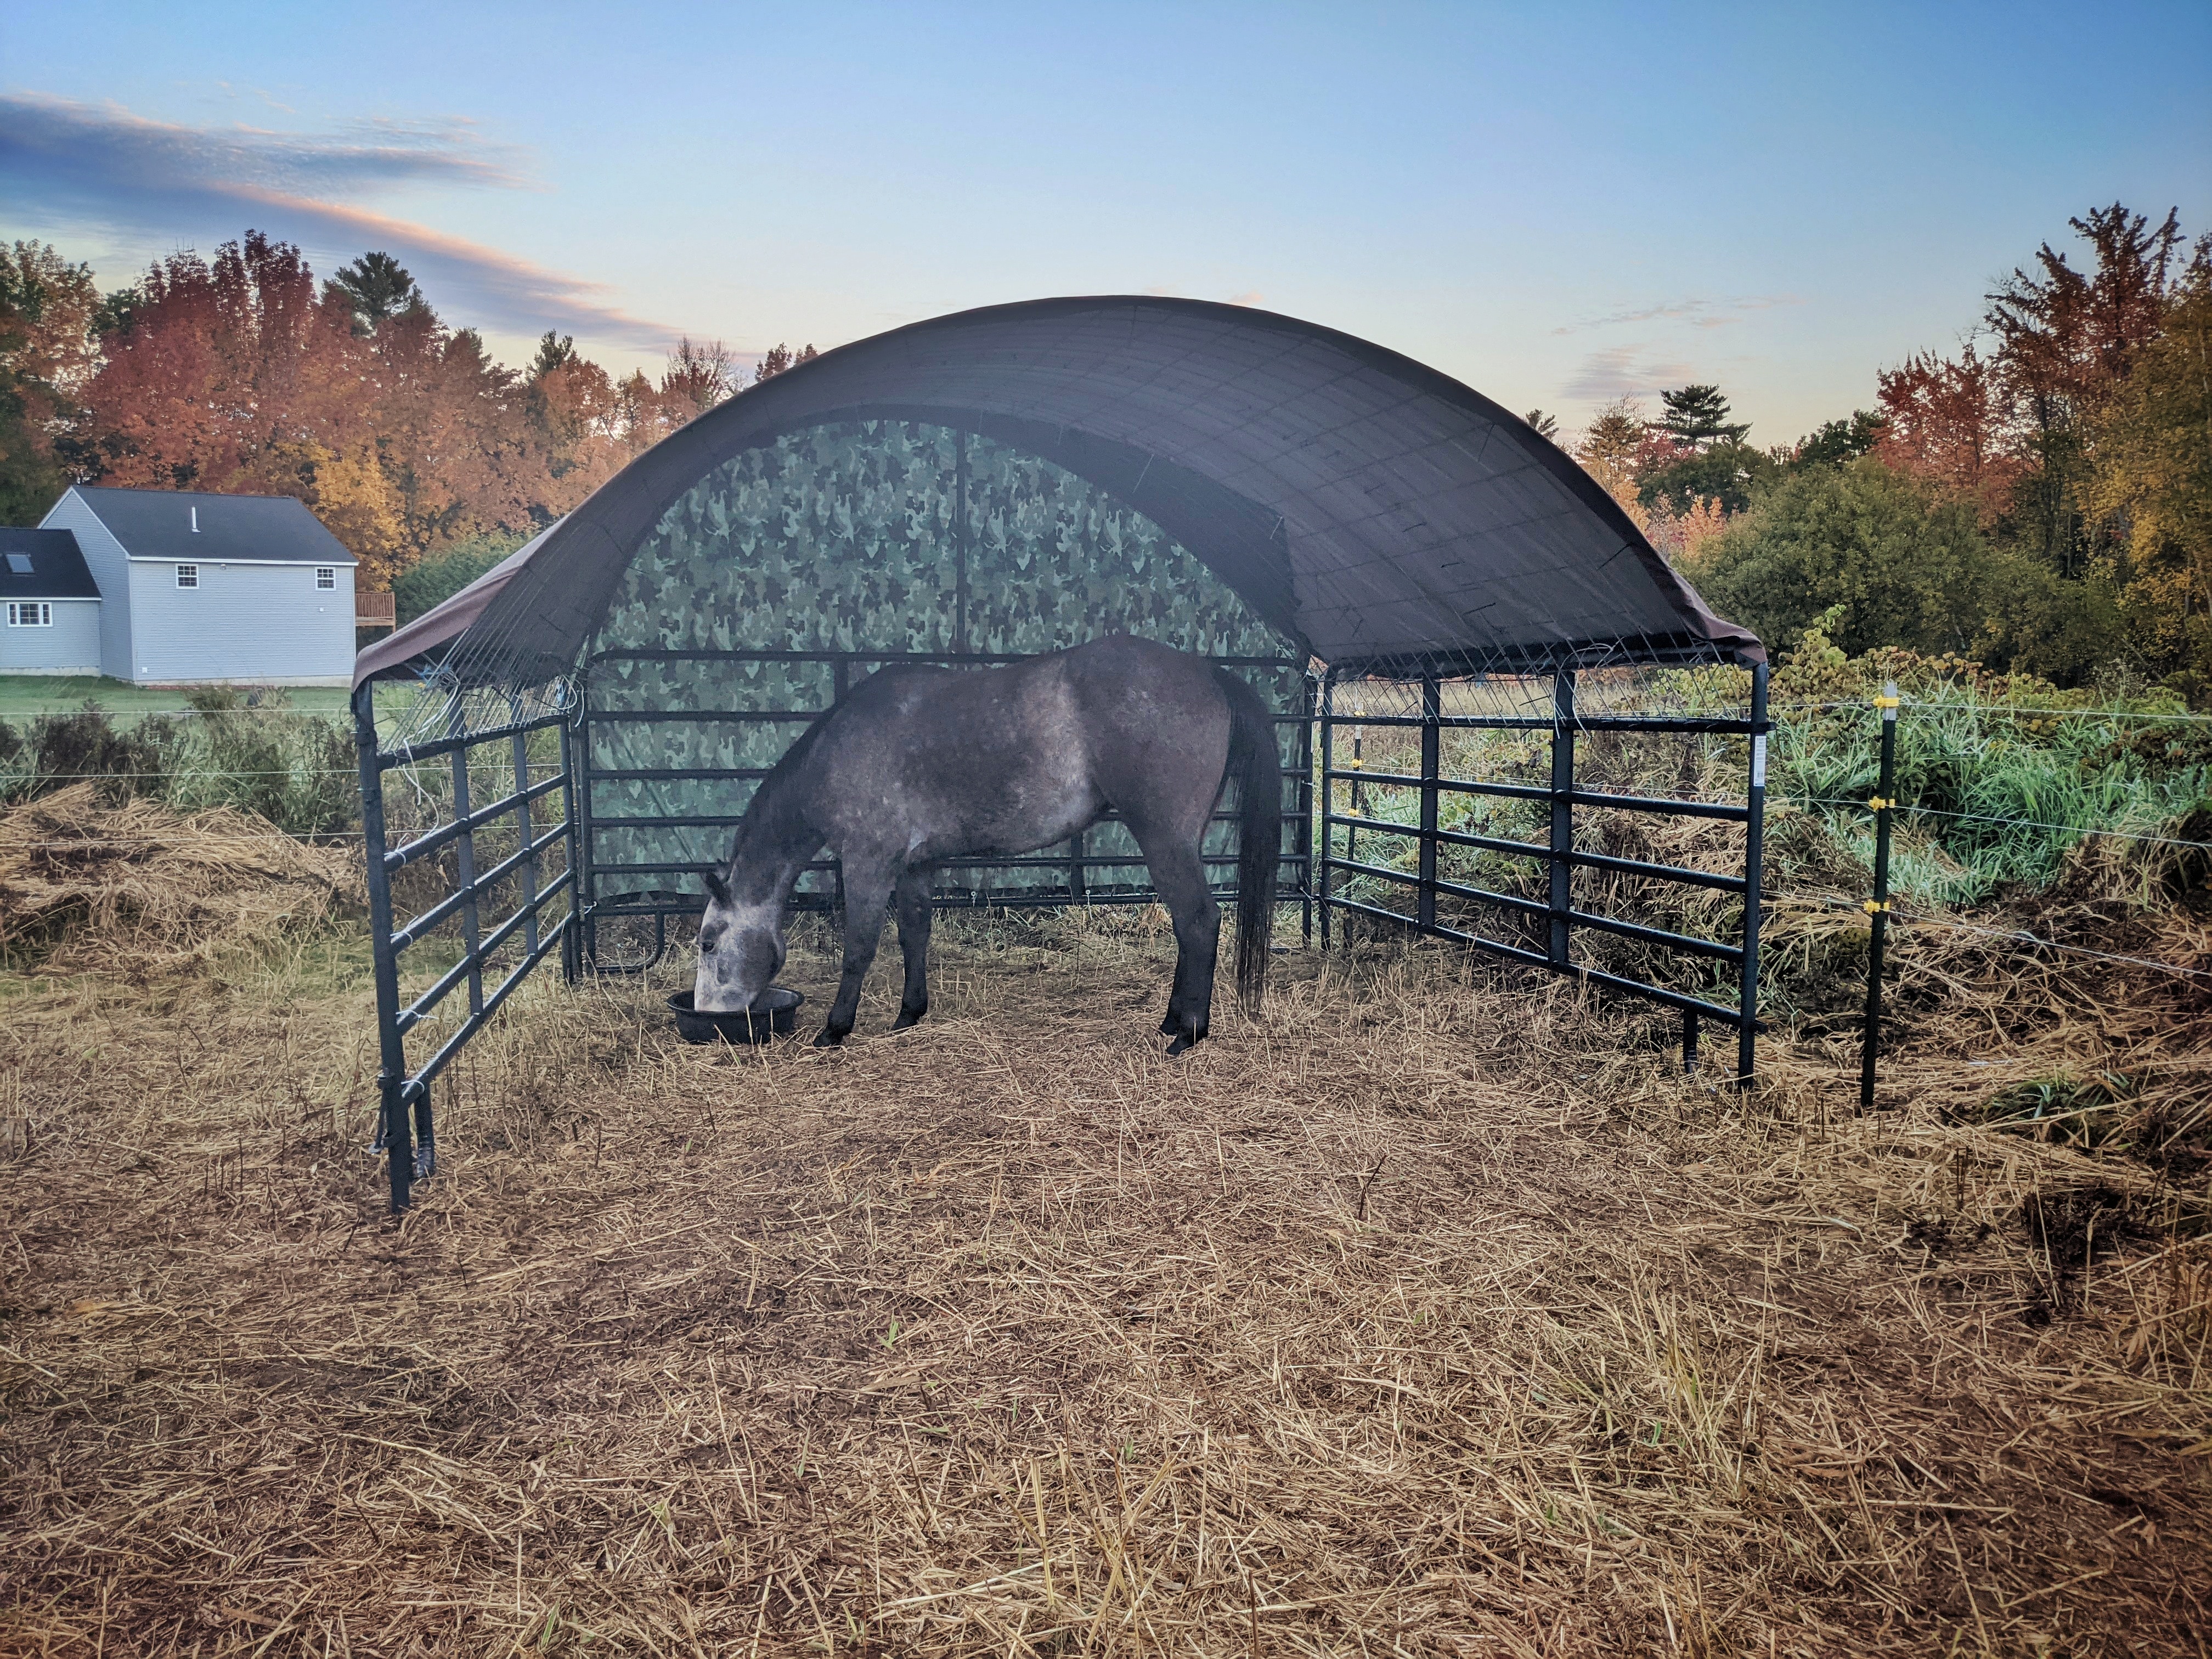 Simple horse shelter: easy to assemble